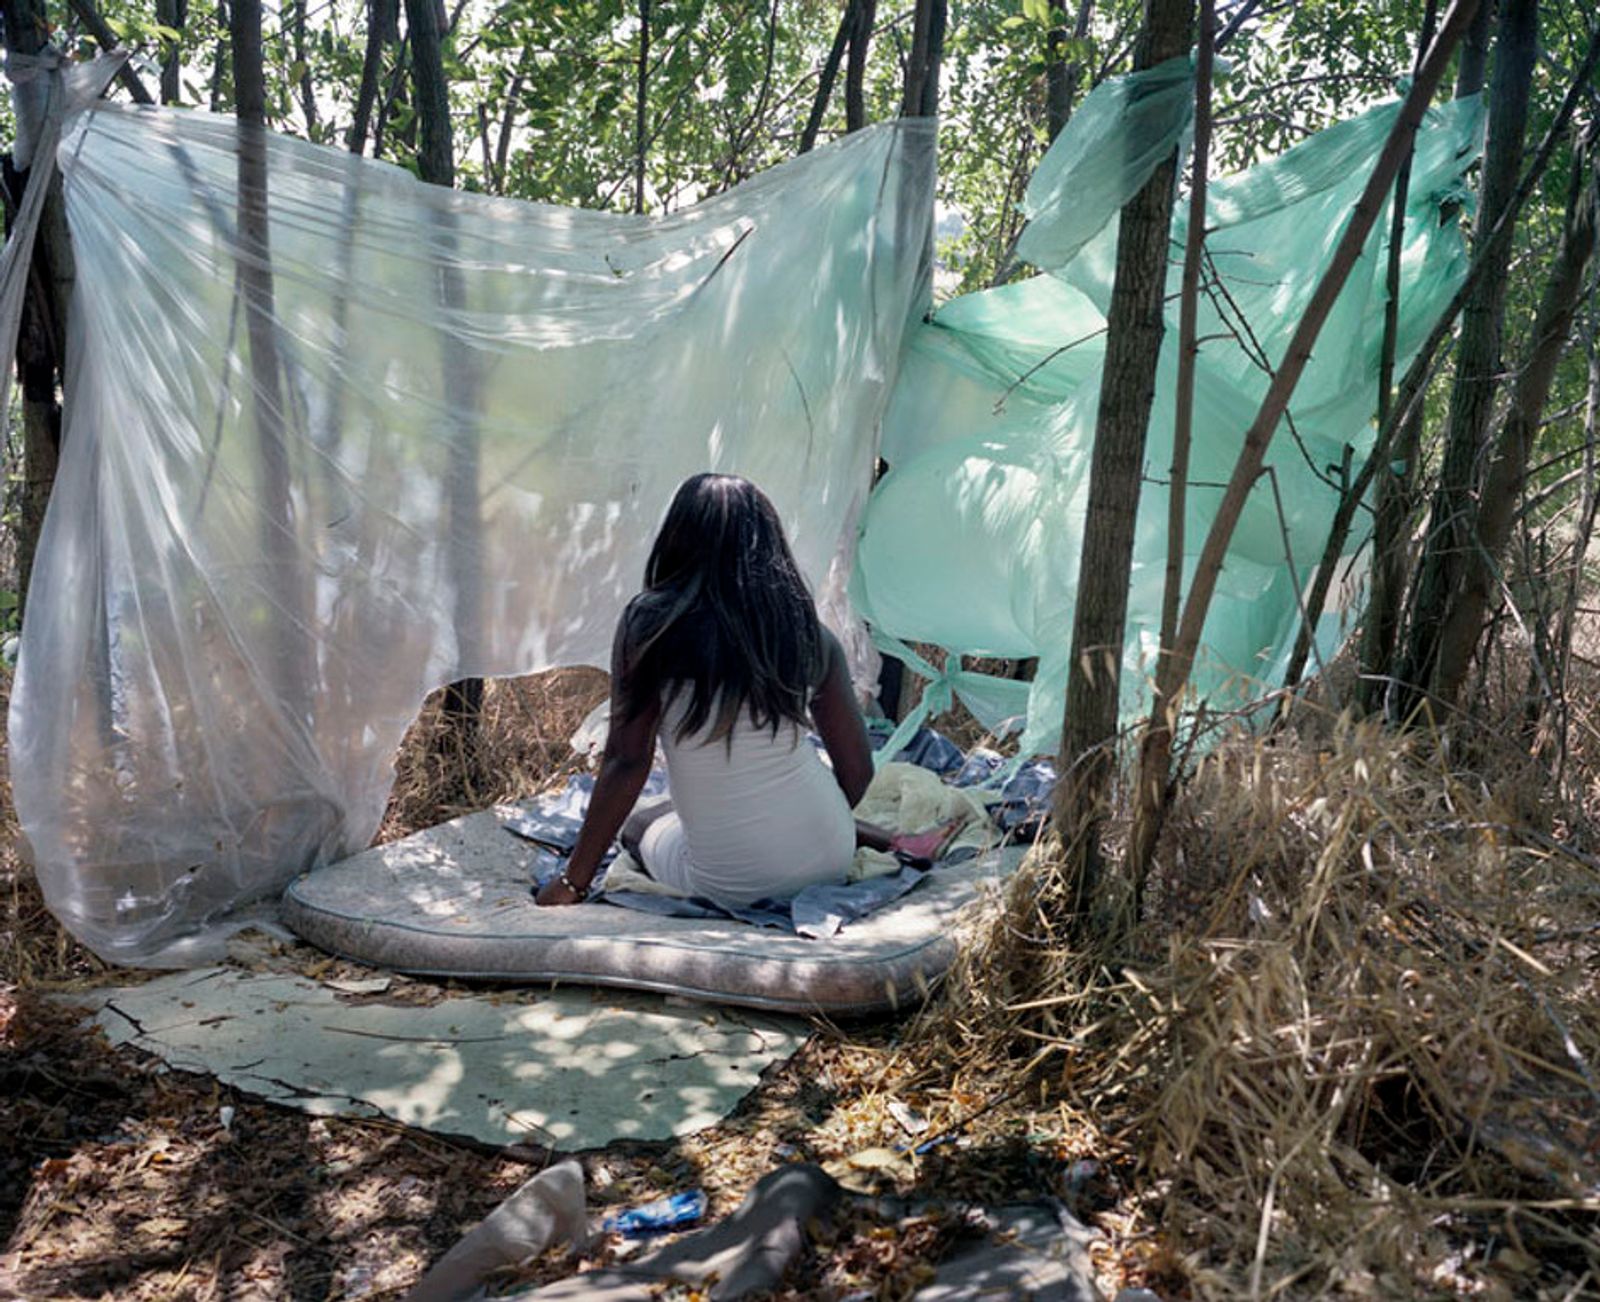 © Paolo Patrizi - Deborah, a sex worker, on her makeshift bed, Rome, Italy